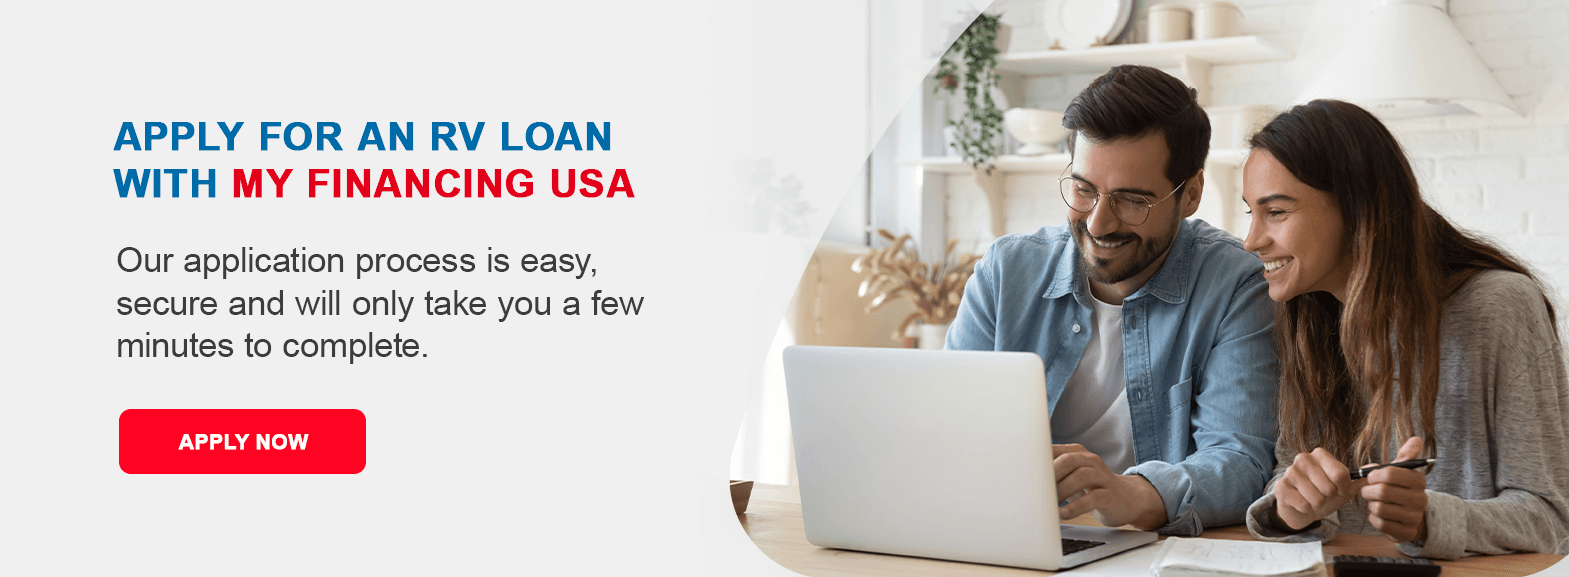 Apply for an RV Loan With My Financing USA